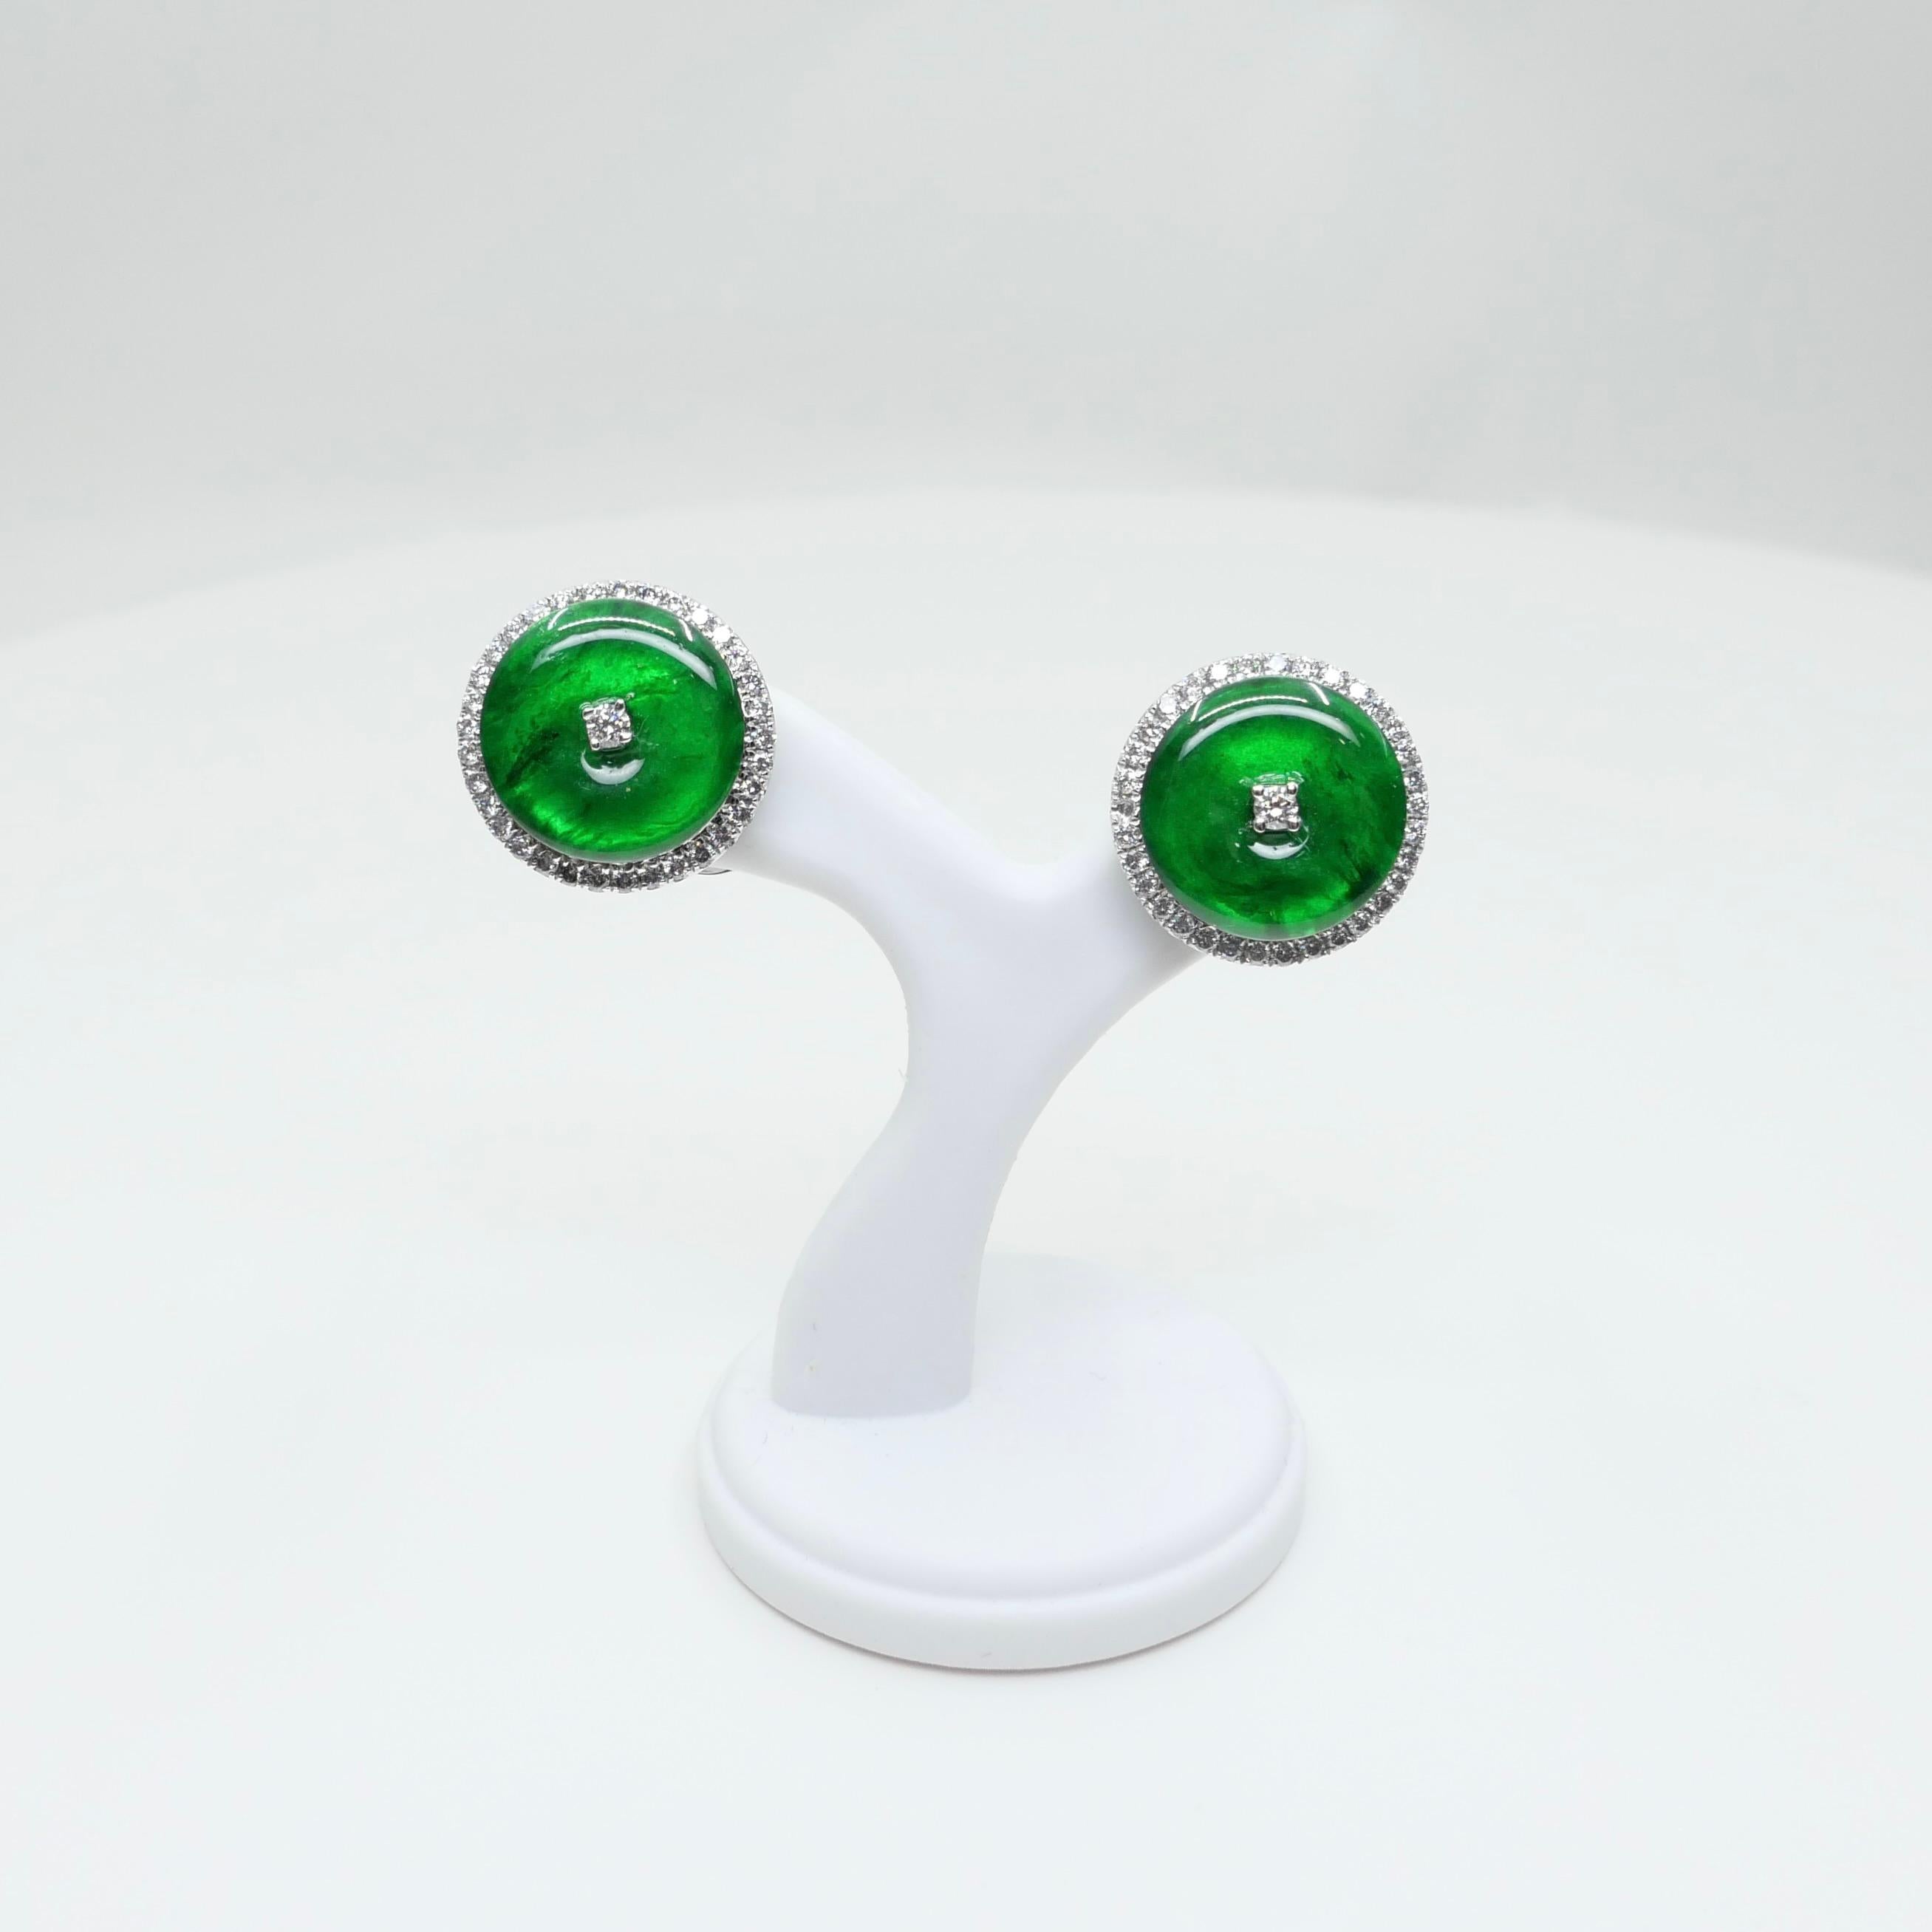 Certified Natural Type A Jadeite Jade And Diamond Earrings. Apple Green Color For Sale 6